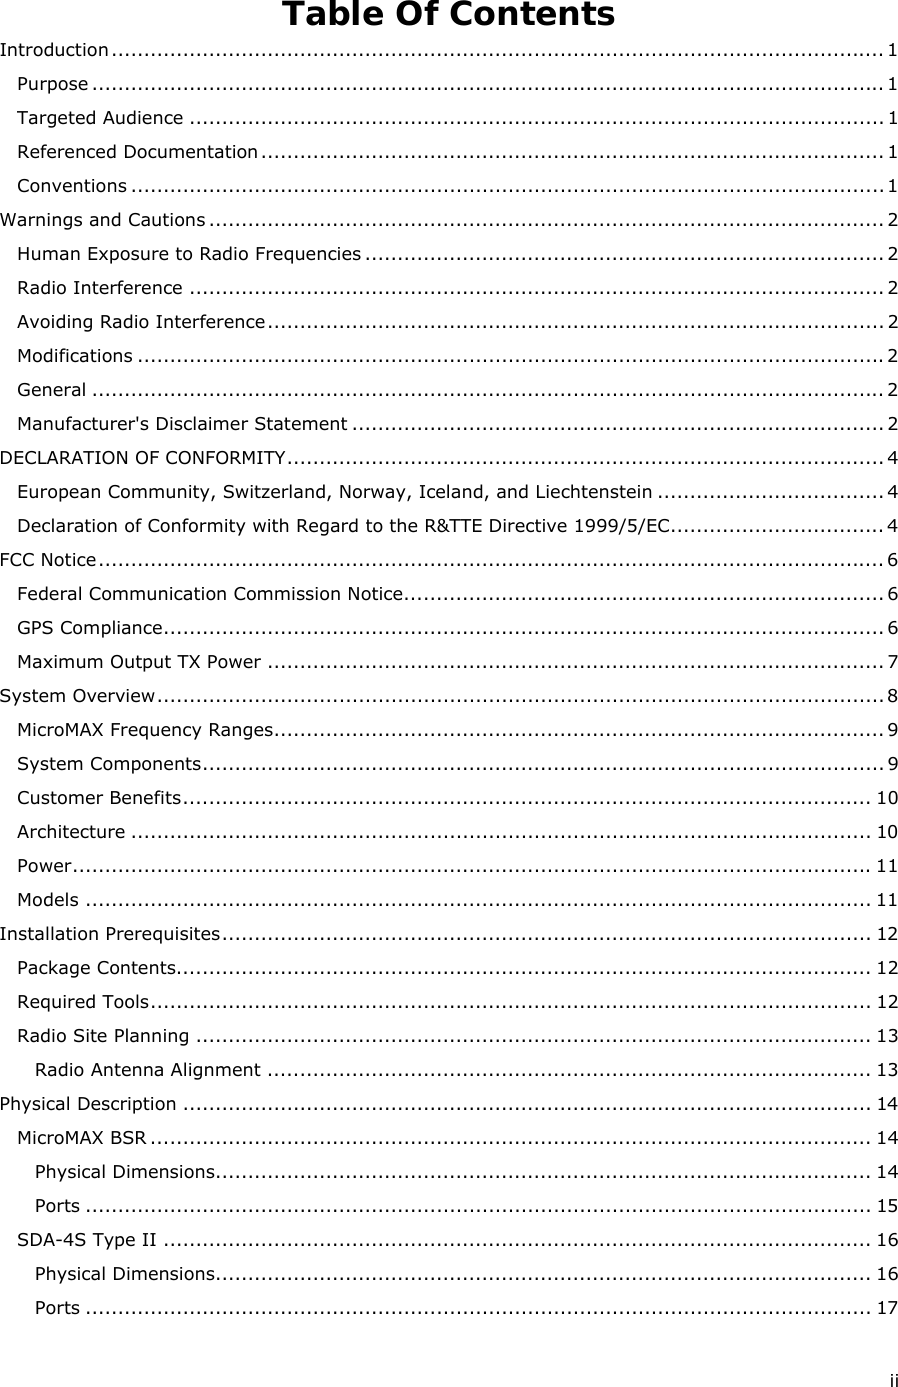  ii Table Of Contents Introduction....................................................................................................................... 1 Purpose .......................................................................................................................... 1 Targeted Audience ........................................................................................................... 1 Referenced Documentation................................................................................................ 1 Conventions ....................................................................................................................1 Warnings and Cautions ........................................................................................................ 2 Human Exposure to Radio Frequencies ................................................................................ 2 Radio Interference ........................................................................................................... 2 Avoiding Radio Interference............................................................................................... 2 Modifications ...................................................................................................................2 General .......................................................................................................................... 2 Manufacturer&apos;s Disclaimer Statement .................................................................................. 2 DECLARATION OF CONFORMITY............................................................................................ 4 European Community, Switzerland, Norway, Iceland, and Liechtenstein ................................... 4 Declaration of Conformity with Regard to the R&amp;TTE Directive 1999/5/EC................................. 4 FCC Notice......................................................................................................................... 6 Federal Communication Commission Notice.......................................................................... 6 GPS Compliance............................................................................................................... 6 Maximum Output TX Power ............................................................................................... 7 System Overview................................................................................................................8 MicroMAX Frequency Ranges.............................................................................................. 9 System Components......................................................................................................... 9 Customer Benefits.......................................................................................................... 10 Architecture .................................................................................................................. 10 Power........................................................................................................................... 11 Models ......................................................................................................................... 11 Installation Prerequisites.................................................................................................... 12 Package Contents........................................................................................................... 12 Required Tools............................................................................................................... 12 Radio Site Planning ........................................................................................................ 13 Radio Antenna Alignment ............................................................................................. 13 Physical Description .......................................................................................................... 14 MicroMAX BSR ............................................................................................................... 14 Physical Dimensions..................................................................................................... 14 Ports ......................................................................................................................... 15 SDA-4S Type II ............................................................................................................. 16 Physical Dimensions..................................................................................................... 16 Ports ......................................................................................................................... 17 